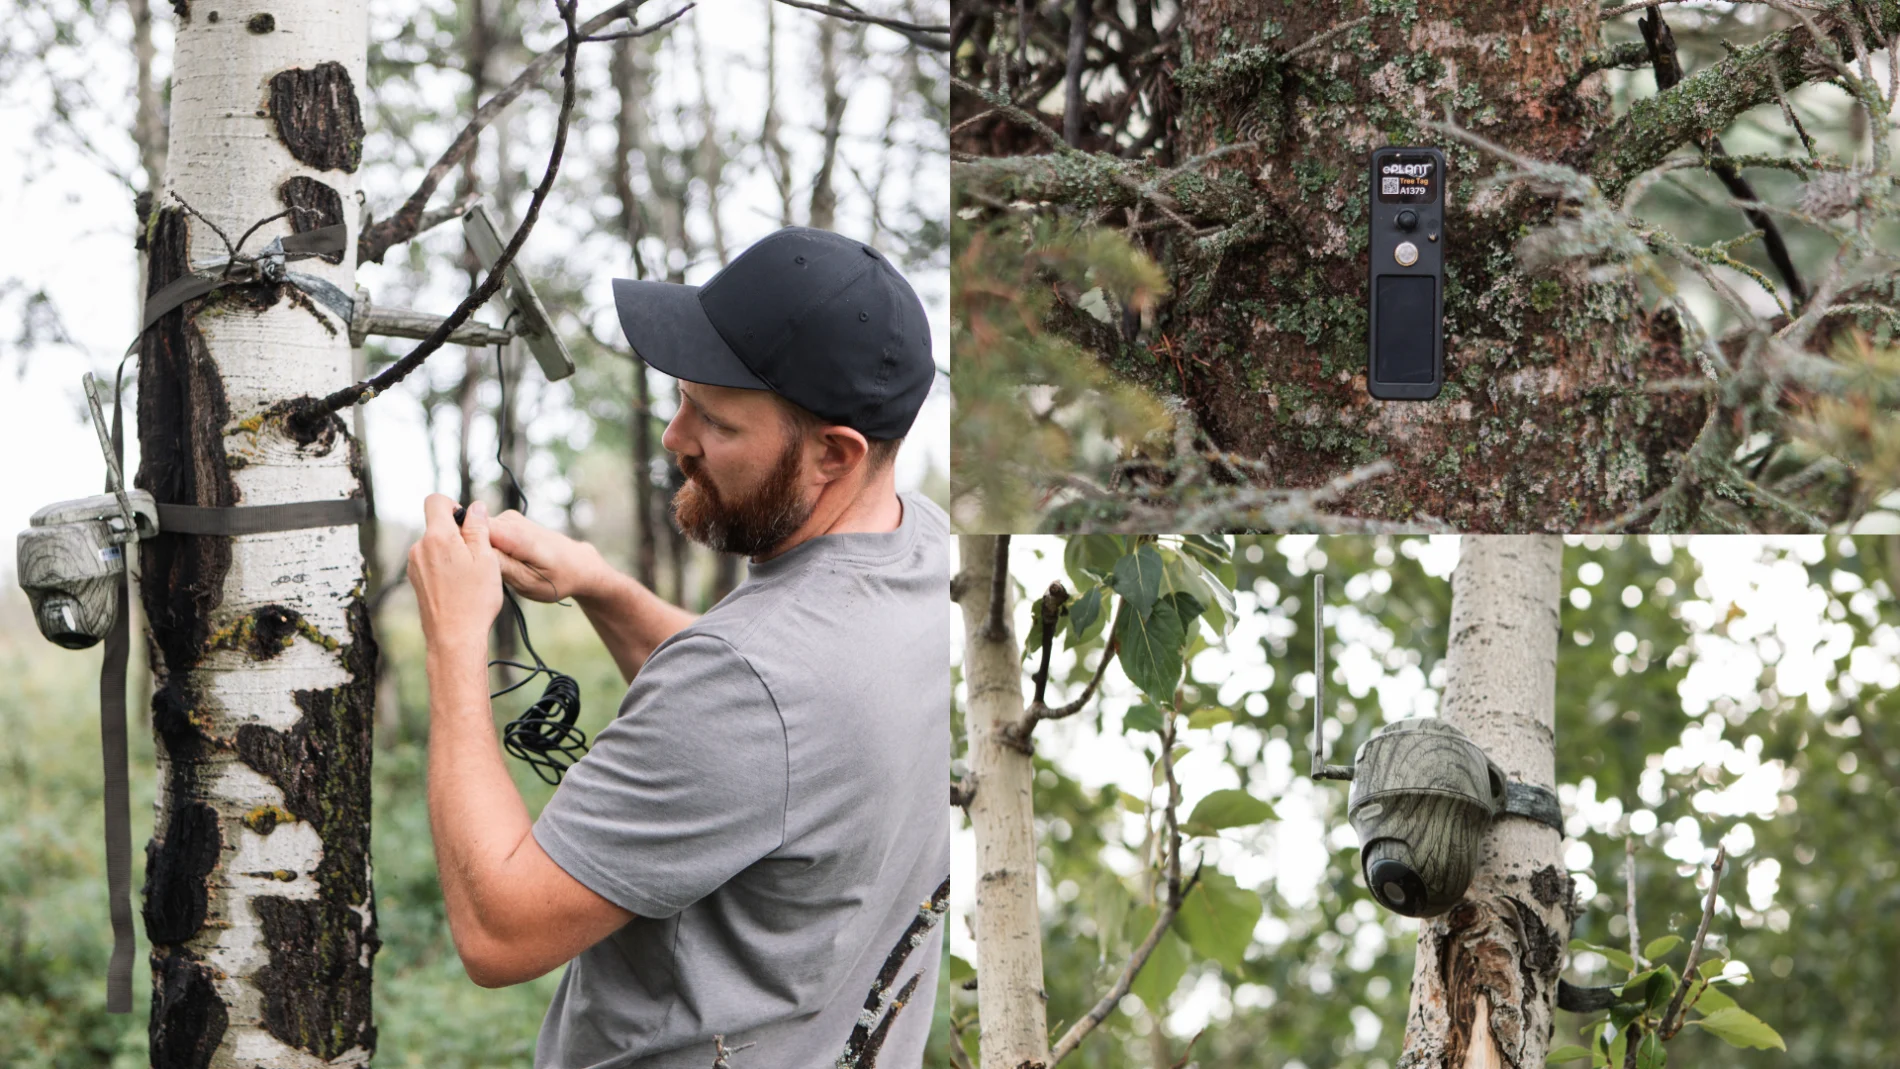 veritree's Stephen Emsley installs an in-field camera on a tree

